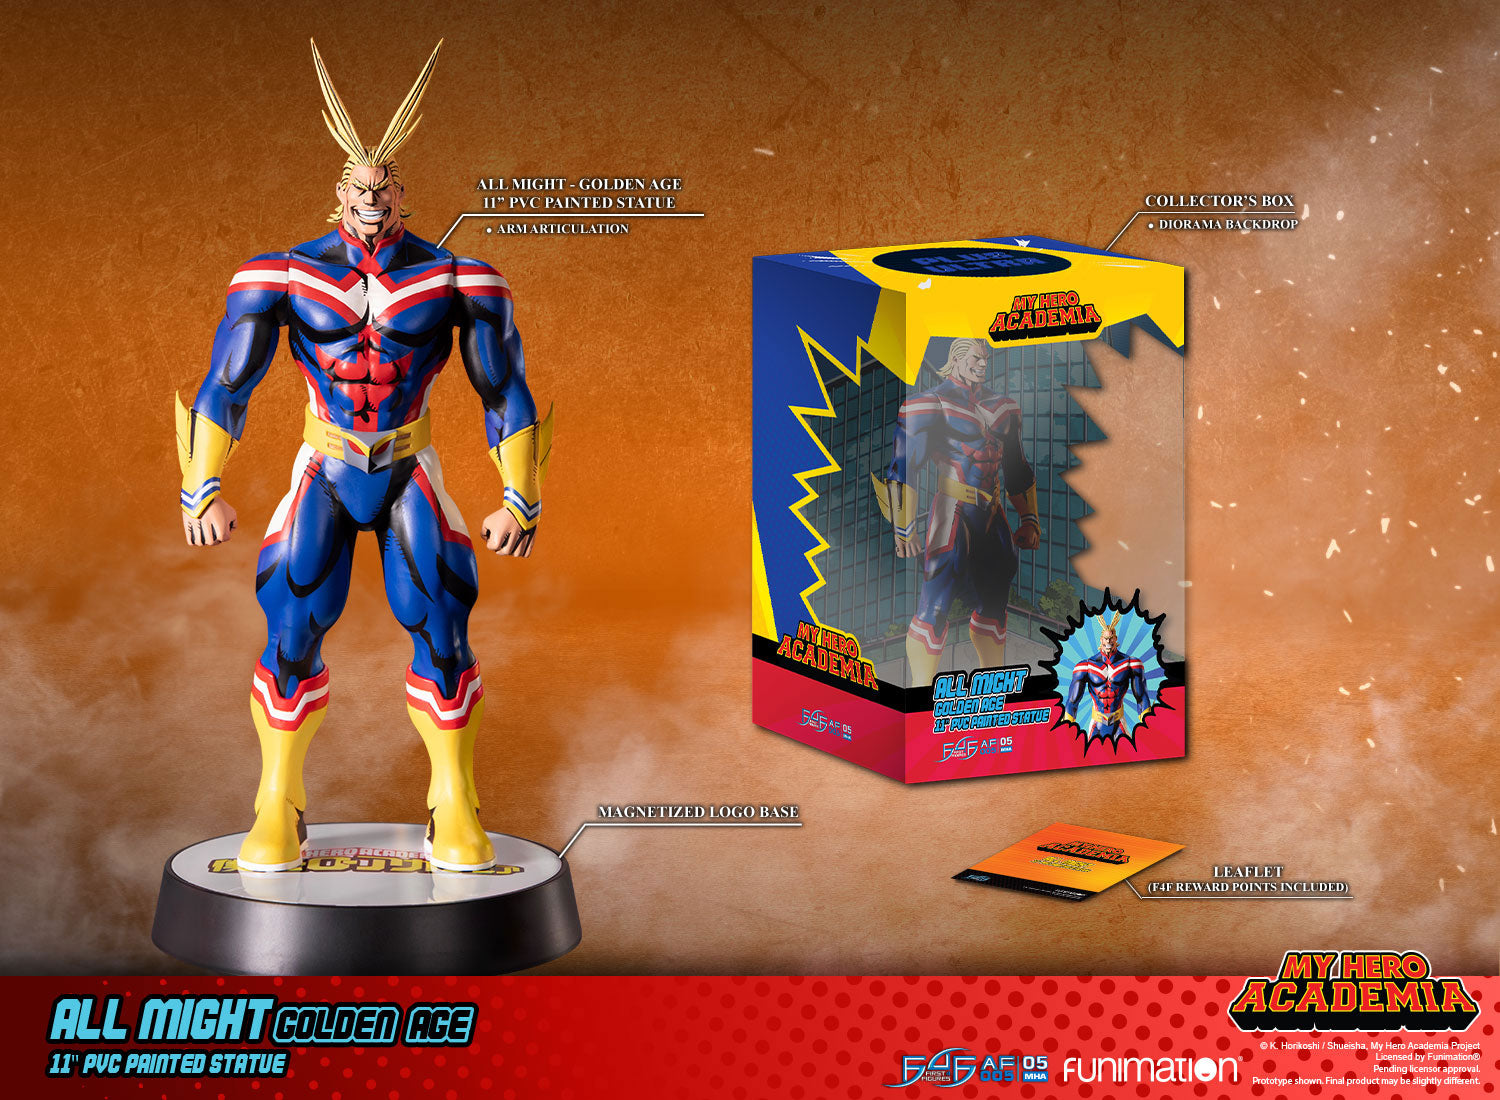 F4F My Hero Academia: All Might Golden Age PVC Statue